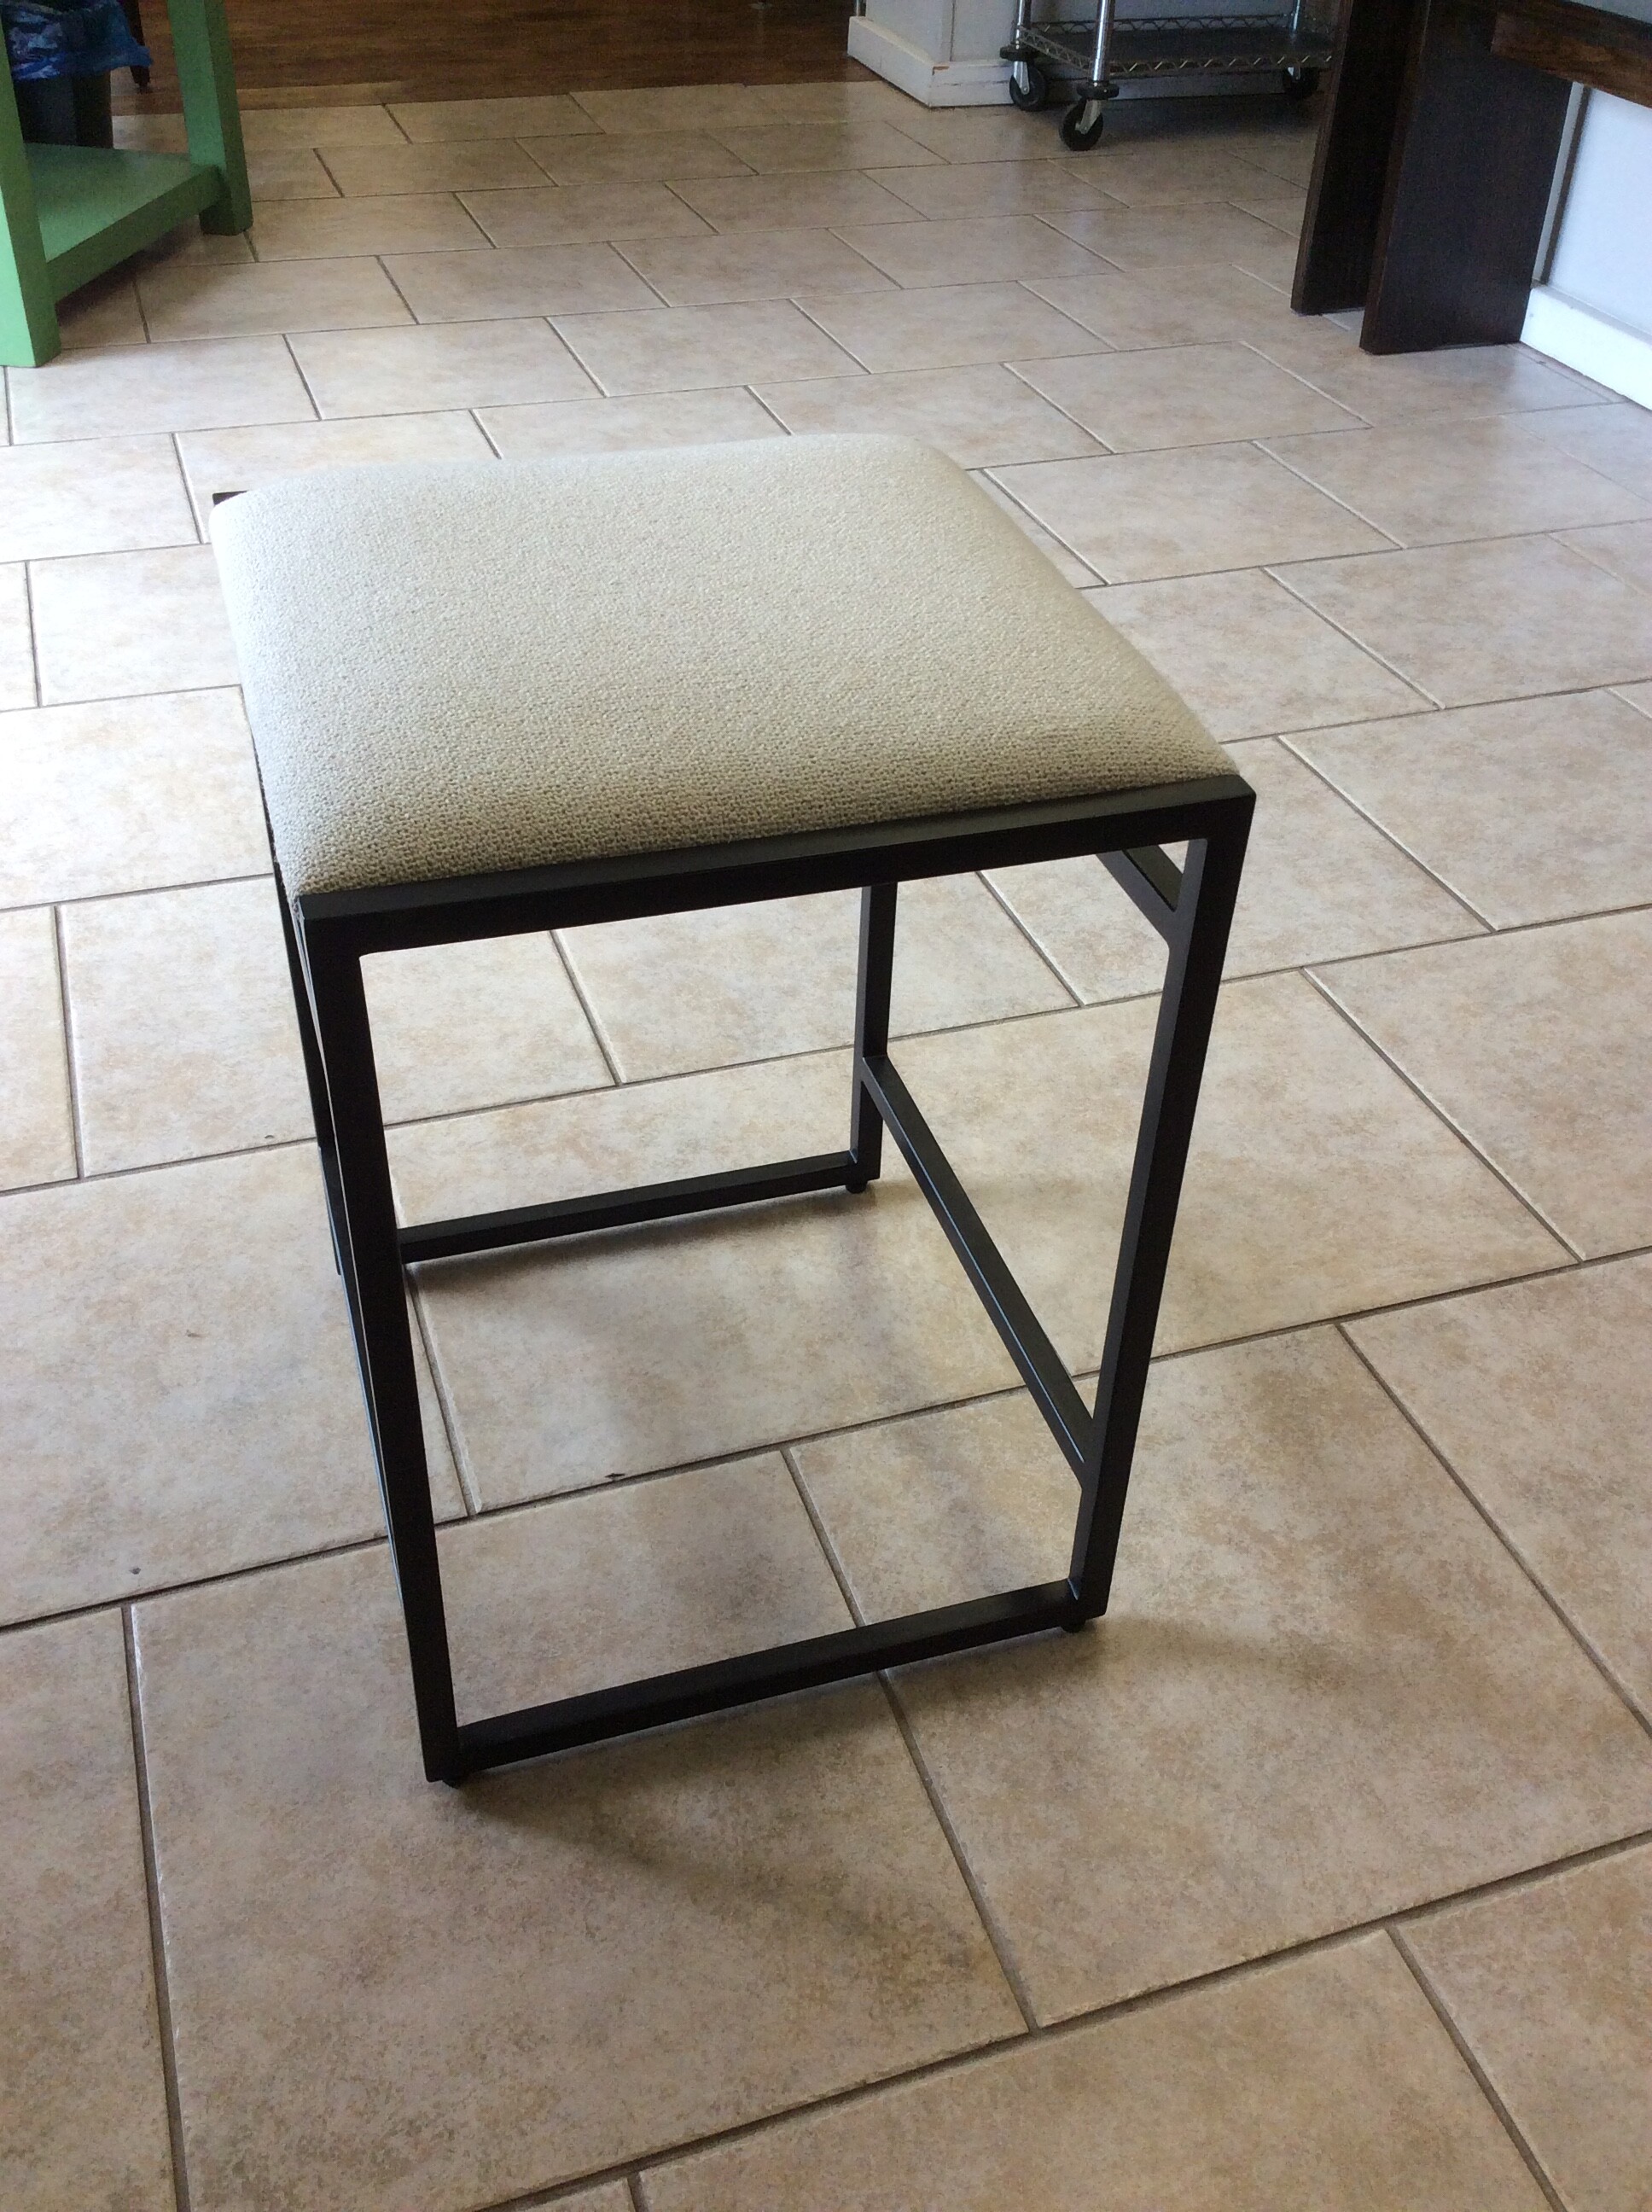 Modern in design, this counter height stool is from Pottery Barn. It features a black metal frame and an off-white upholstered seat,